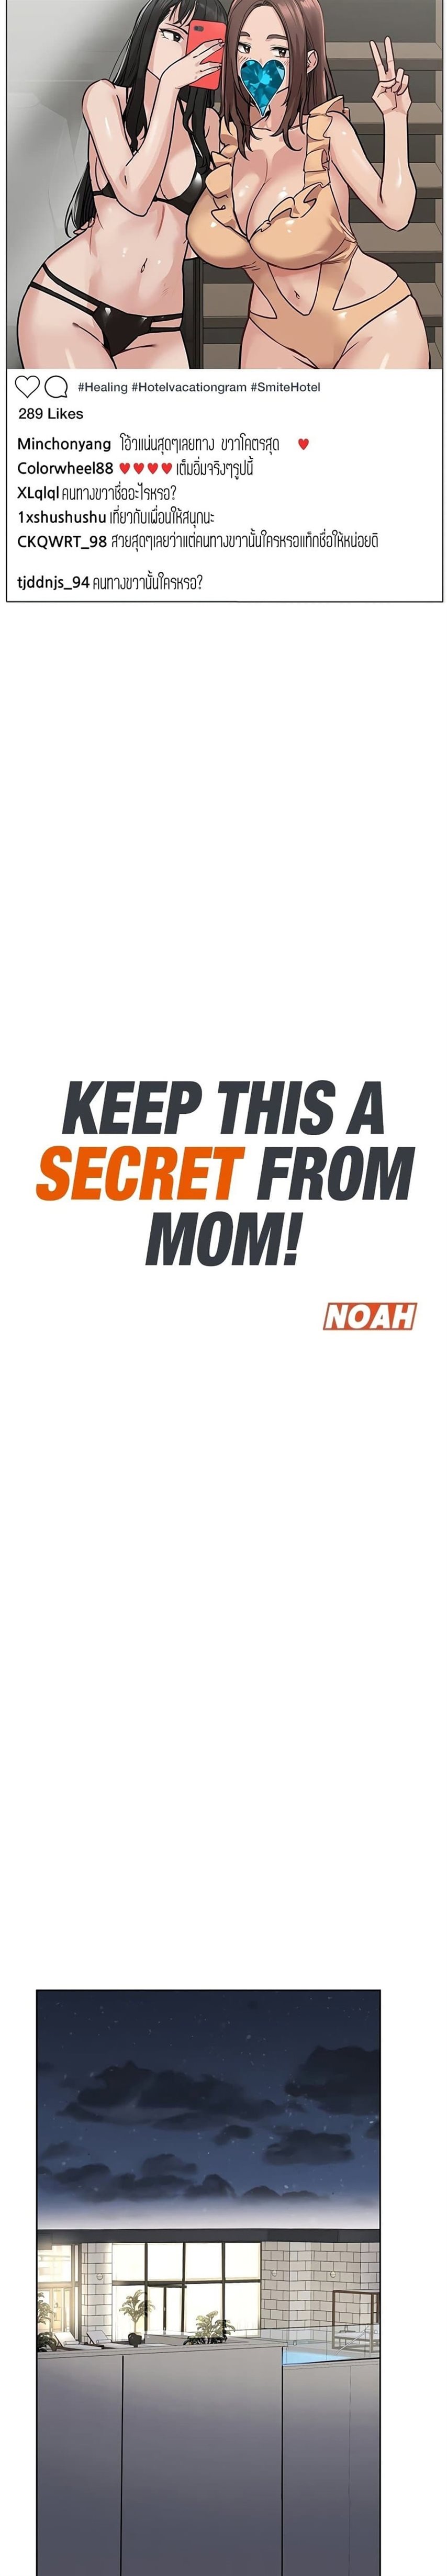 Keep it a secret from your mother! 42 (4)